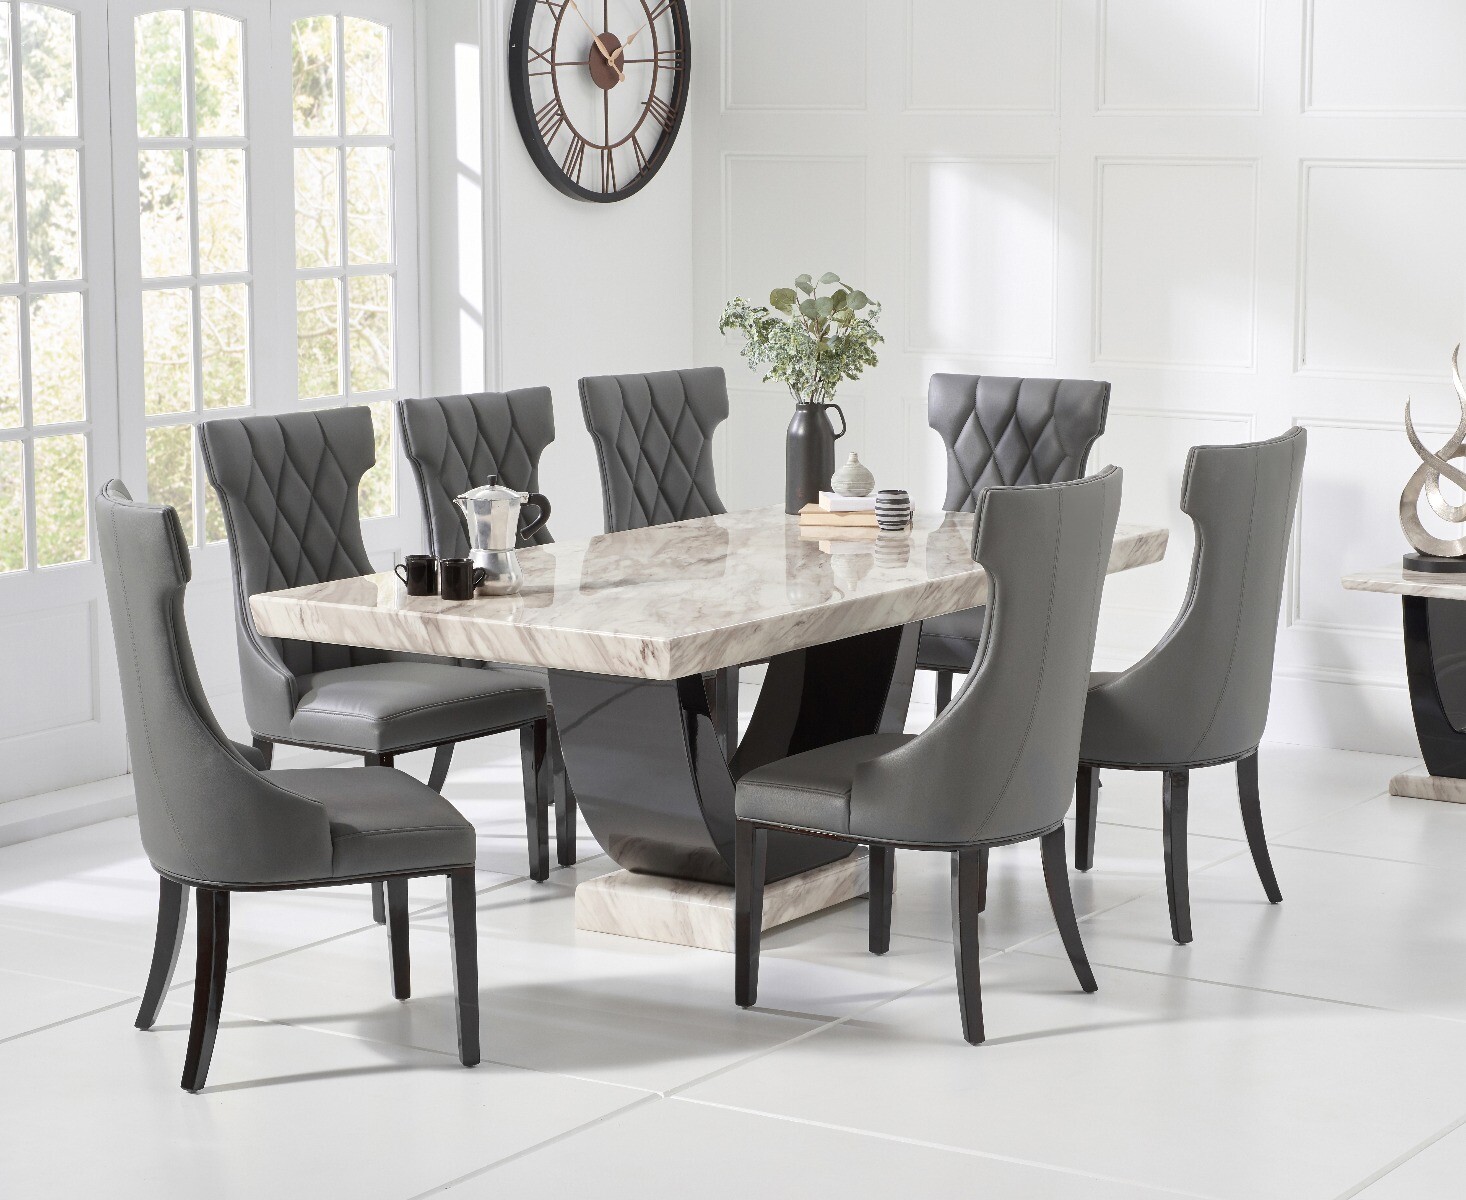 Novara 200cm Cream And Black Pedestal Marble Dining Table With 6 Cream Sophia Chairs